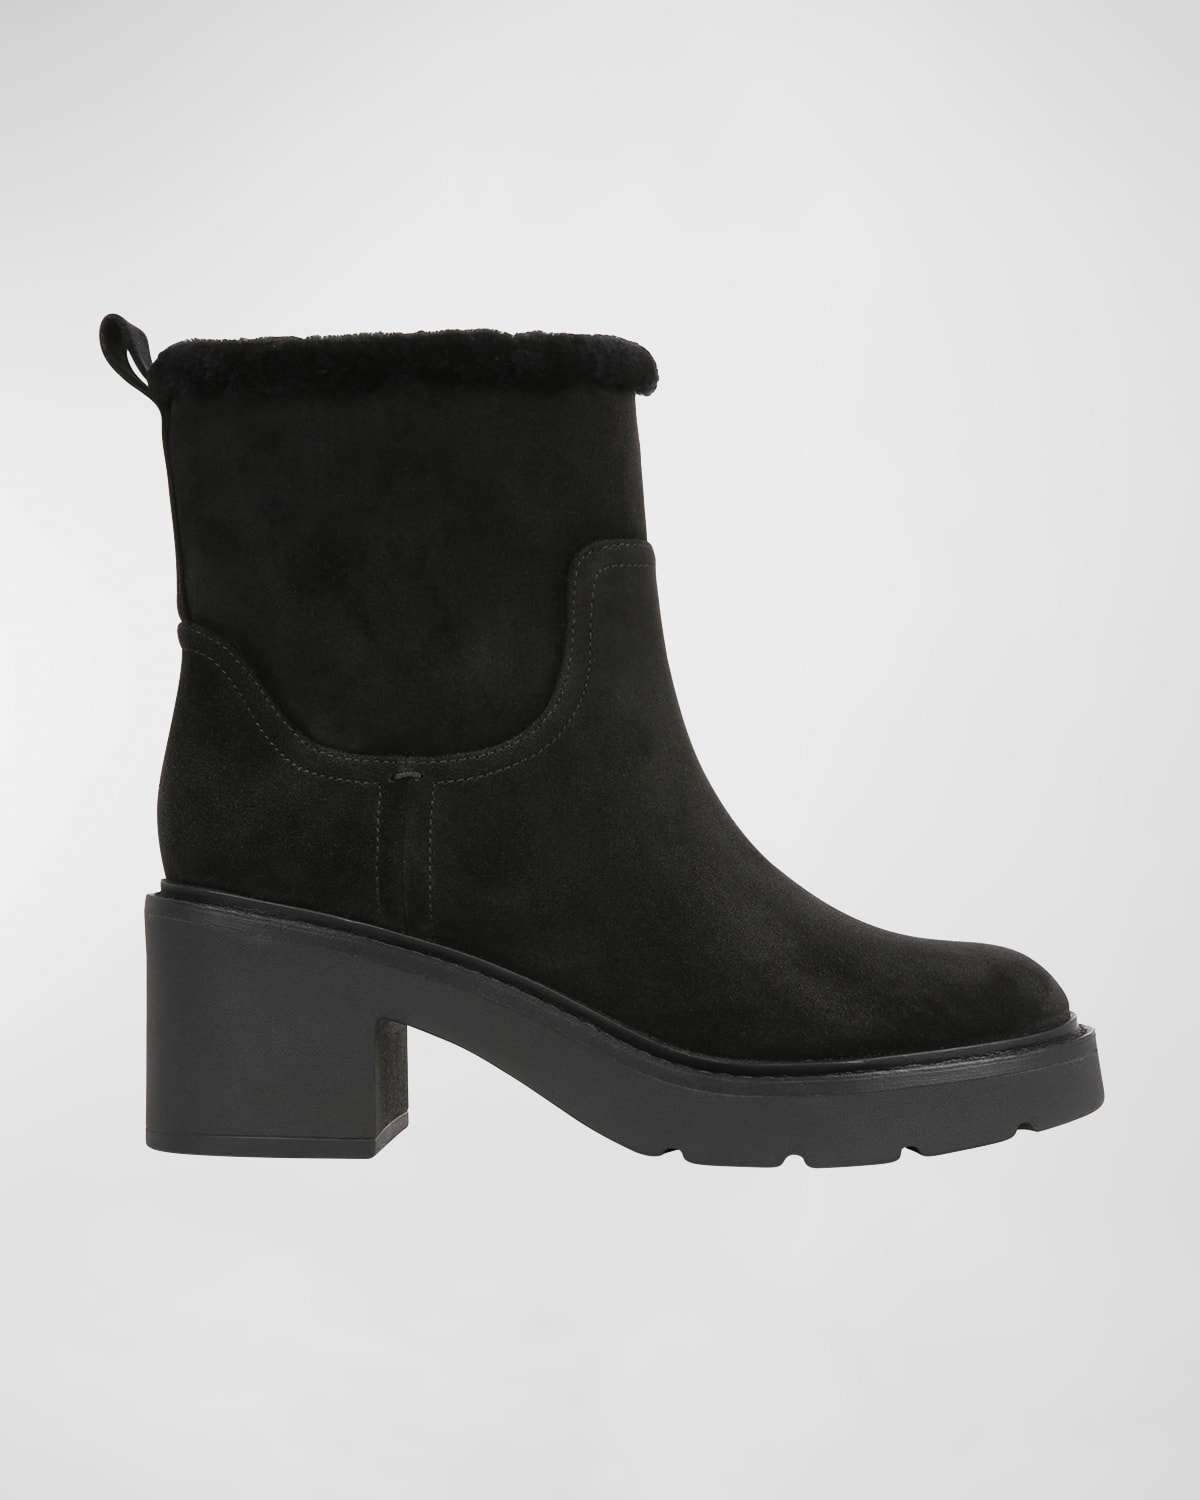 VINCE REDDING SUEDE SHEARLING ANKLE BOOTS